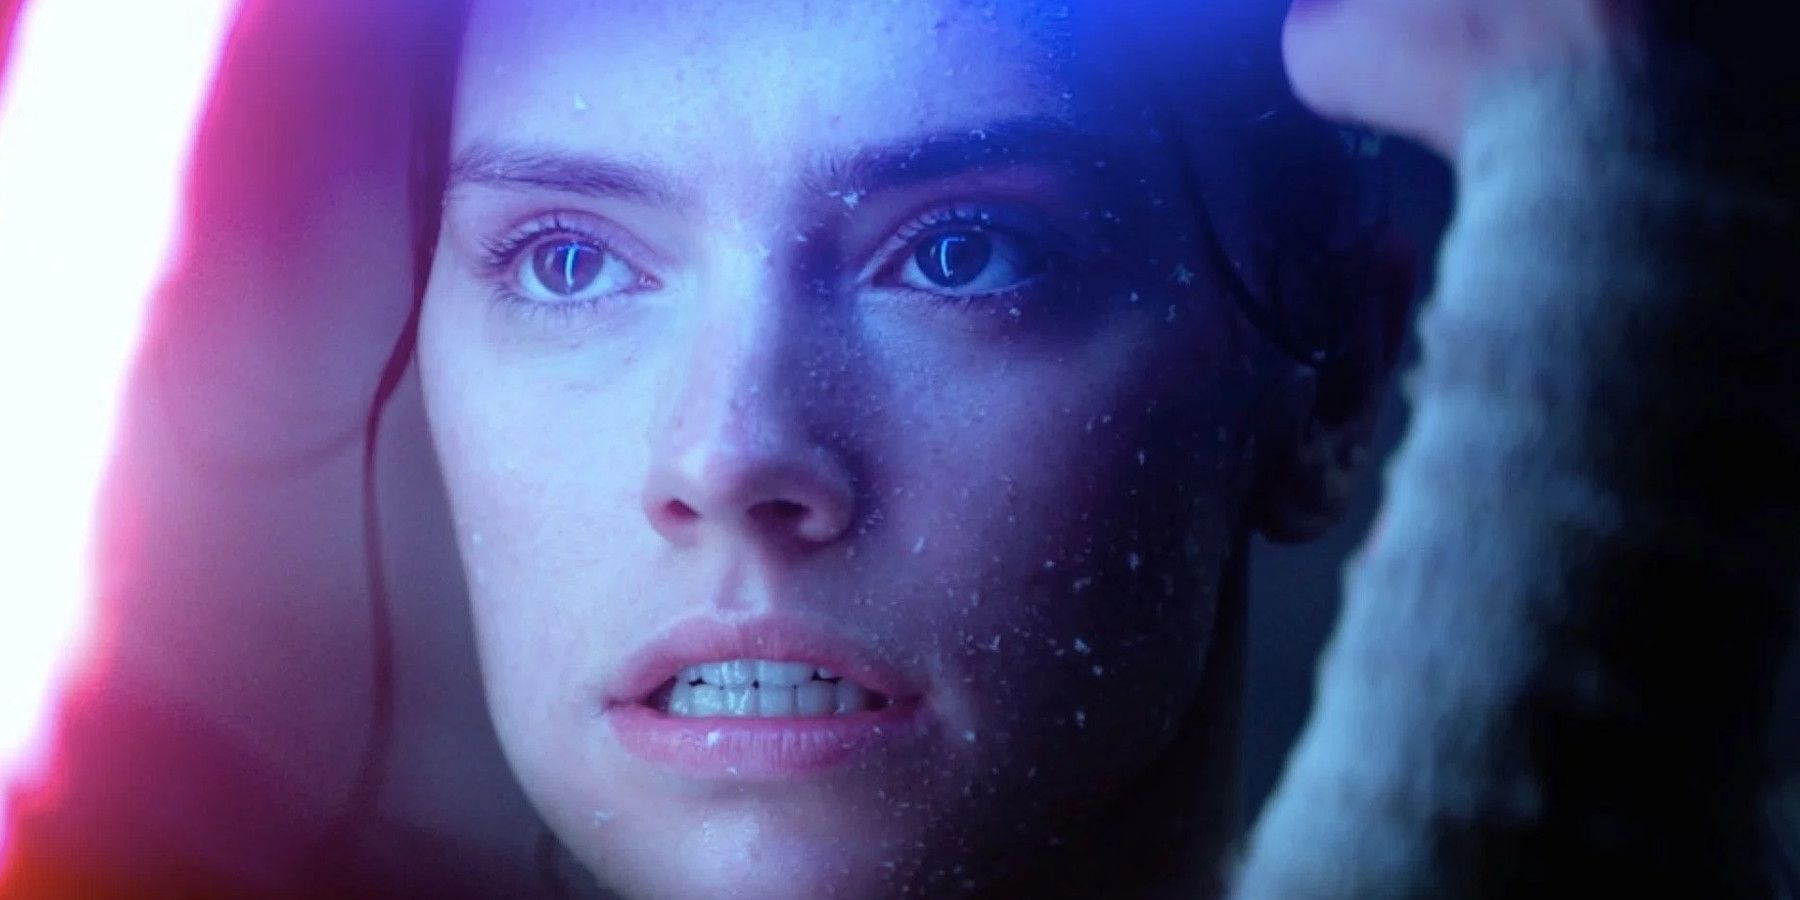 The Force Speaks to Rey During Her Duel With Kylo Ren in Star Wars The Force Awakens